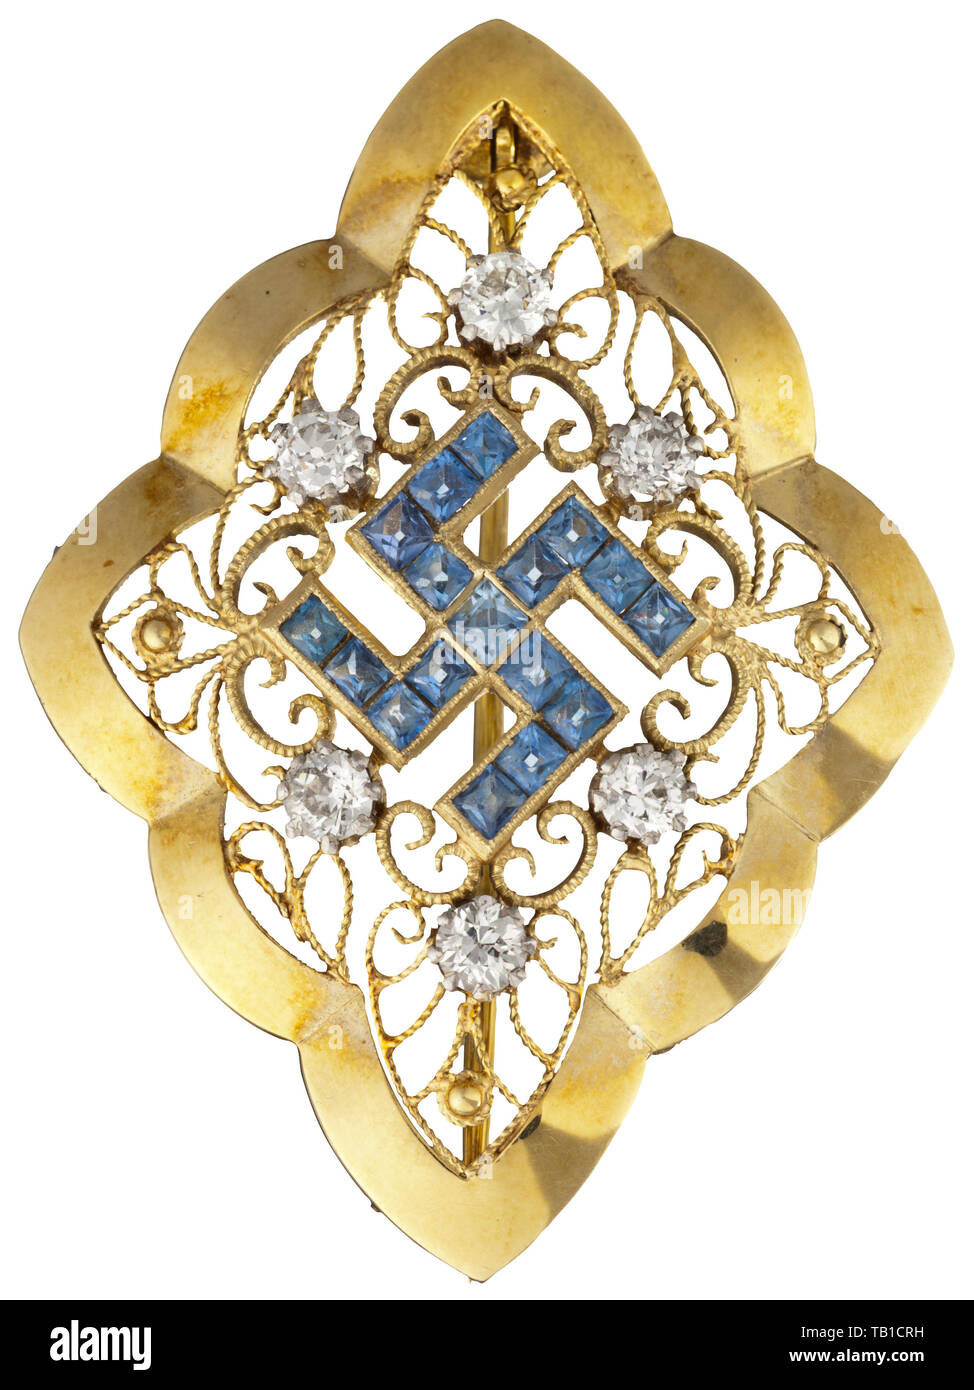 Emmy Göring - a gold brooch with cut diamonds and sapphires, Curved lozenge form, set within the central gold filigree a swastika with 17 light blue sapphires, surrounded by six diamonds. Hallmark '585' at back. Pin with safety closure. Dimensions 42 x 30 mm, weight 7.5 g. Cf. Hermann Historica, 45th auction, lot 6502, sold for EUR 2,100. 20th century, 1930s, NS, National Socialism, Nazism, Third Reich, German Reich, Germany, German, National Socialist, Nazi, Nazi period, fascism, historic, historical, Editorial-Use-Only Stock Photo